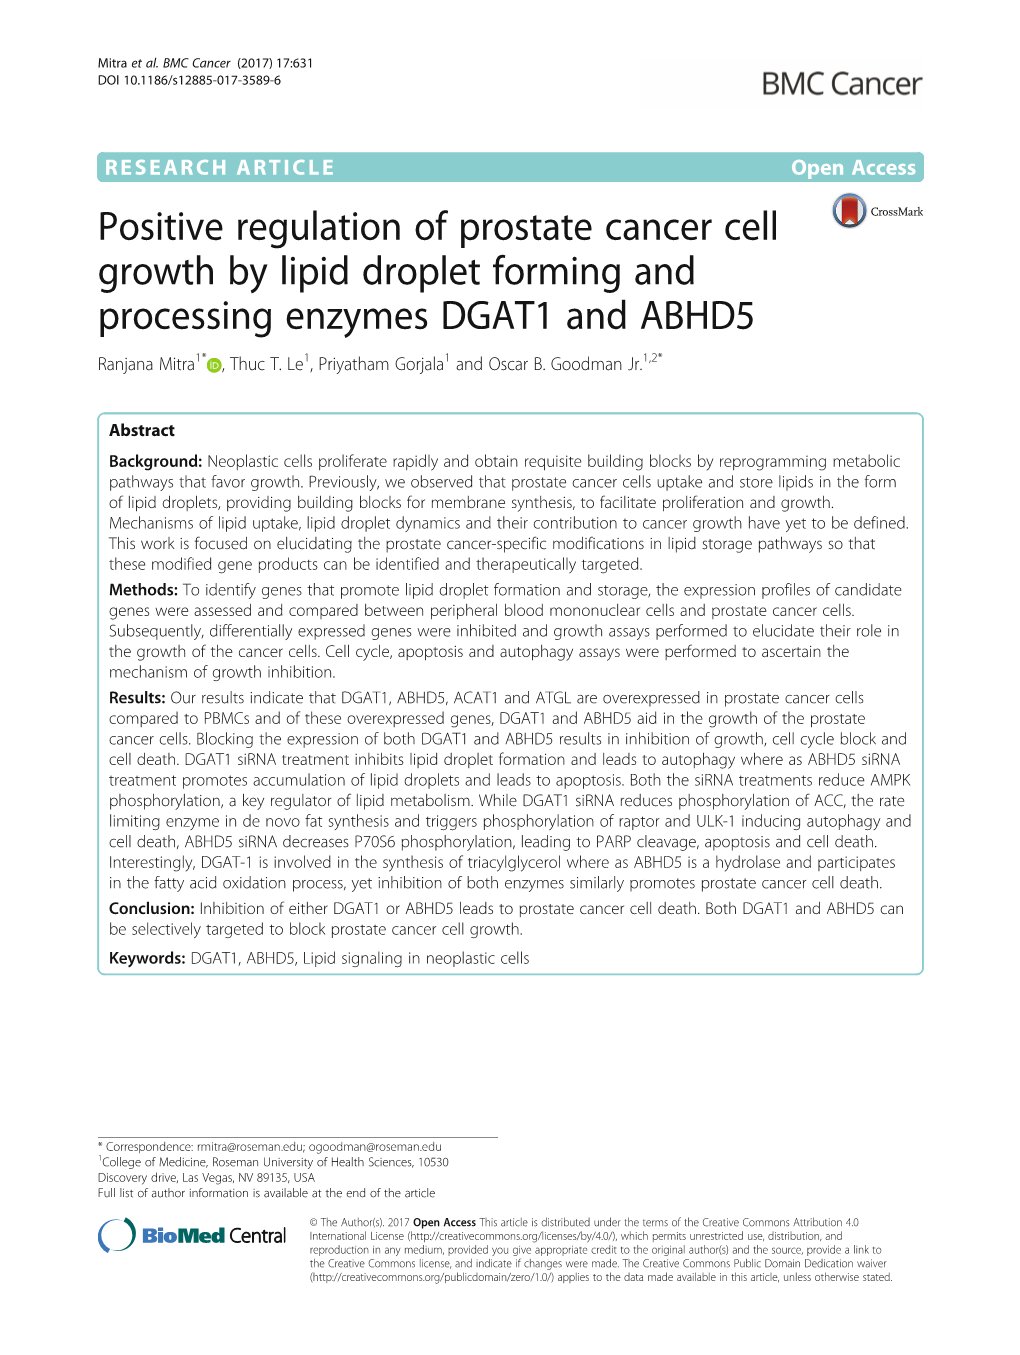 Positive Regulation of Prostate Cancer Cell Growth by Lipid Droplet Forming and Processing Enzymes DGAT1 and ABHD5 Ranjana Mitra1* , Thuc T